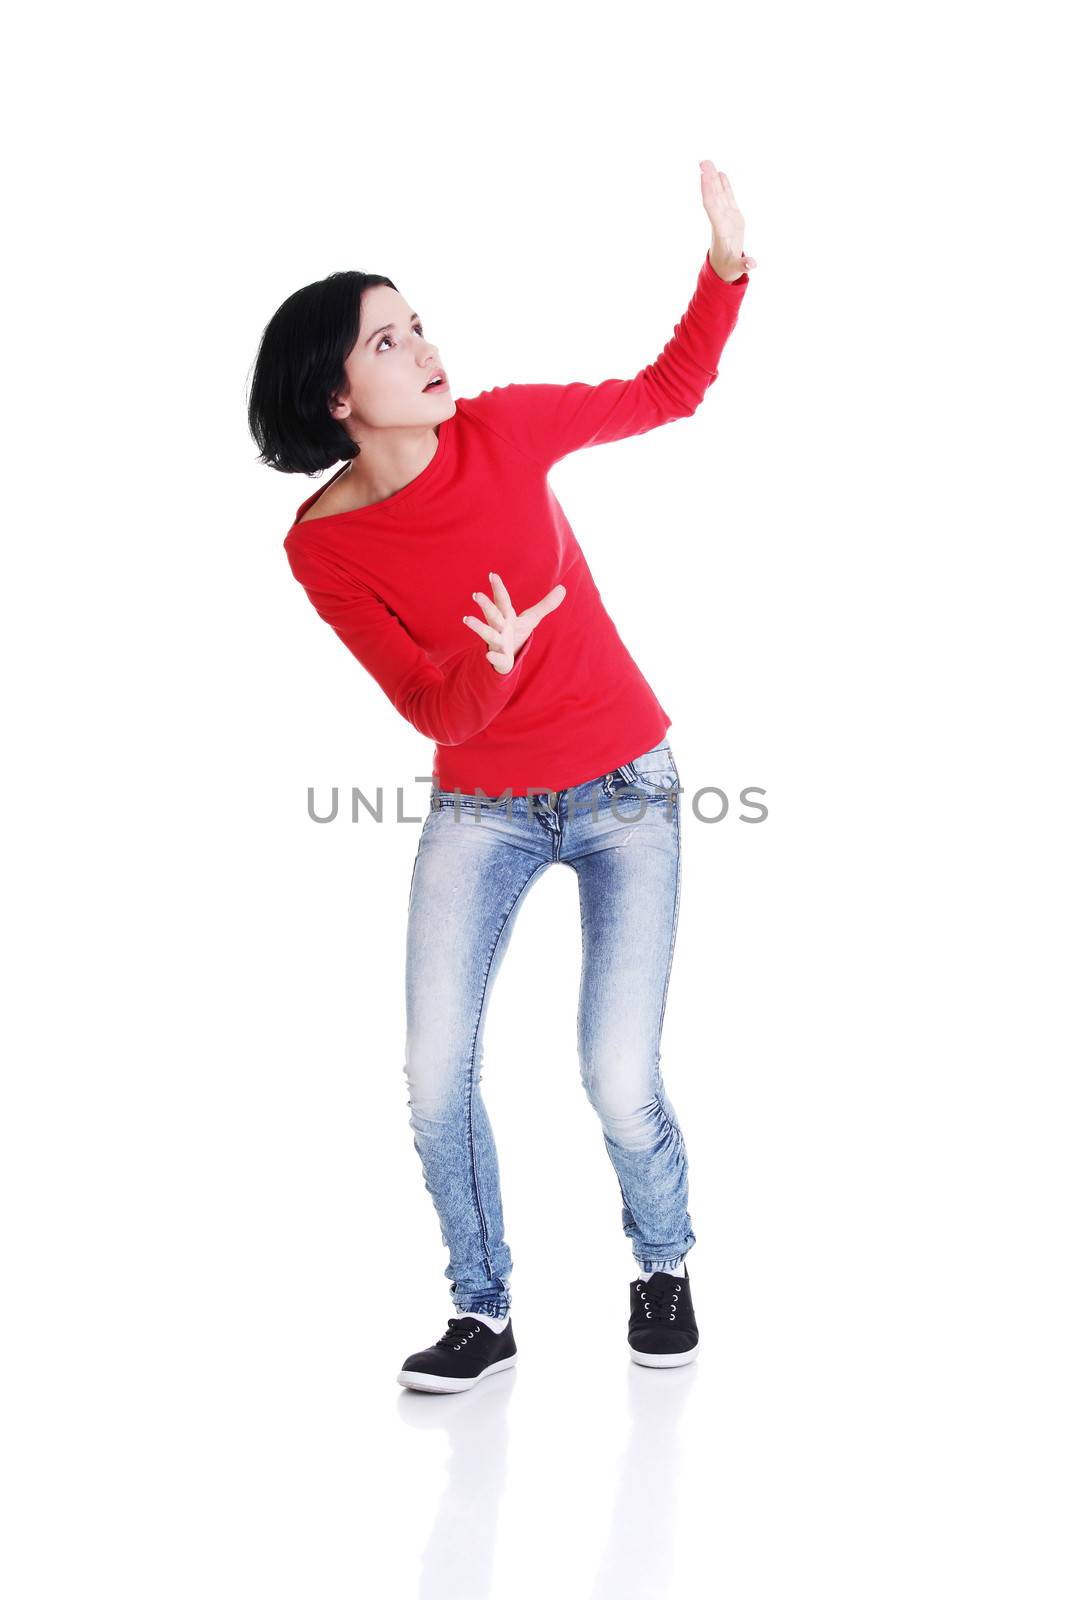 Scared woman defending herself, isolated on white background